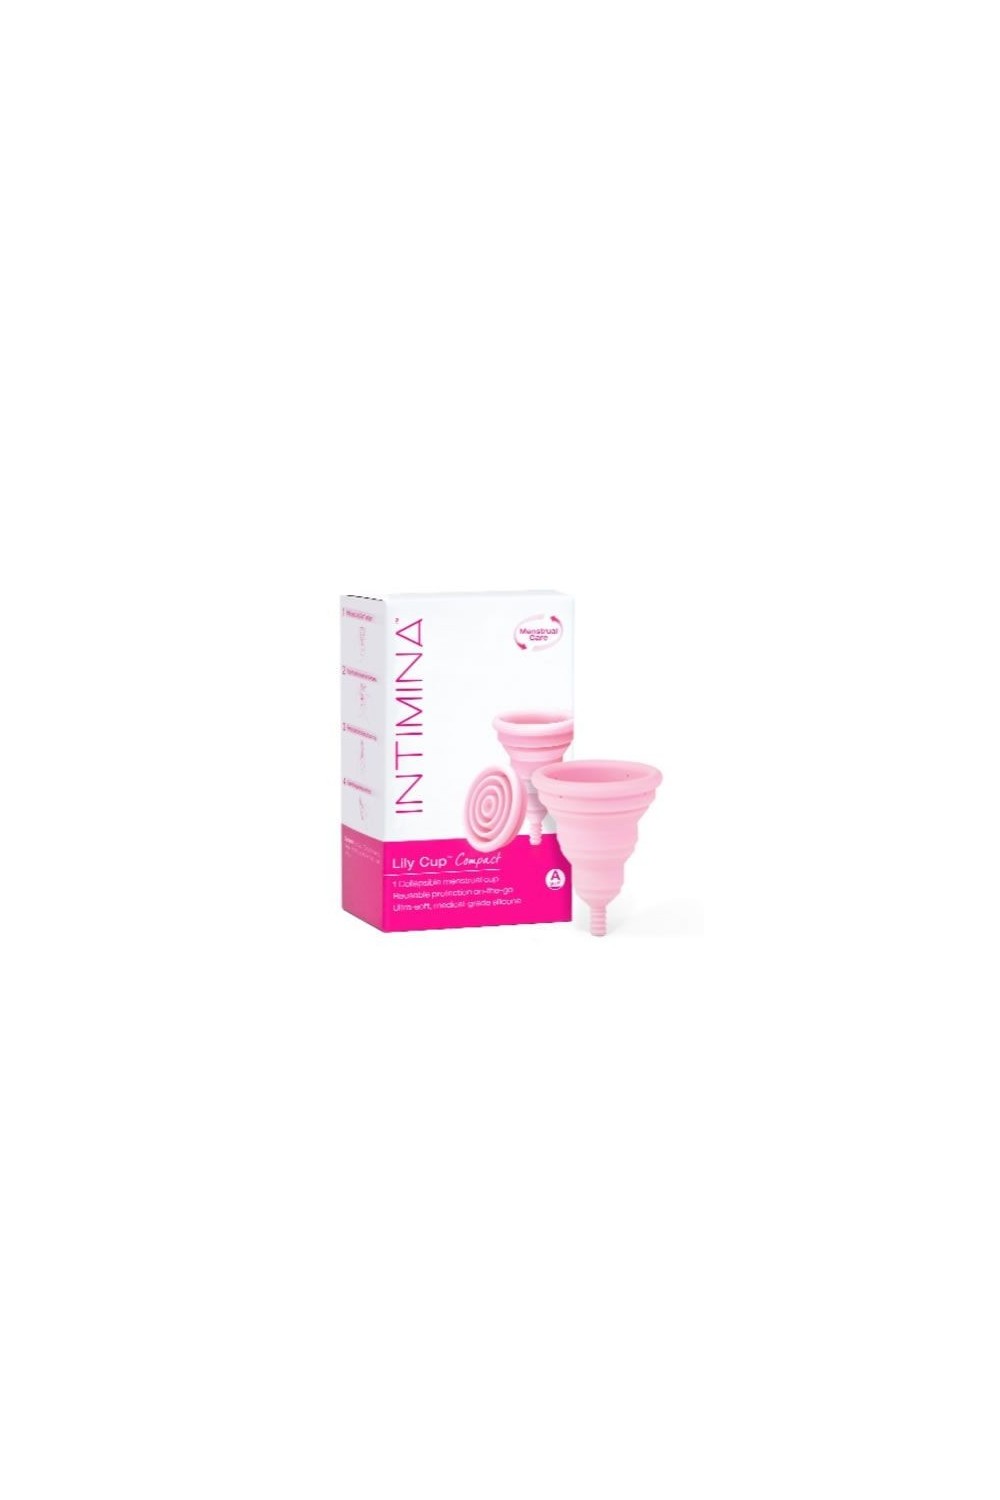 Intimina Lily Cup Compact Menstrual Cup Size A